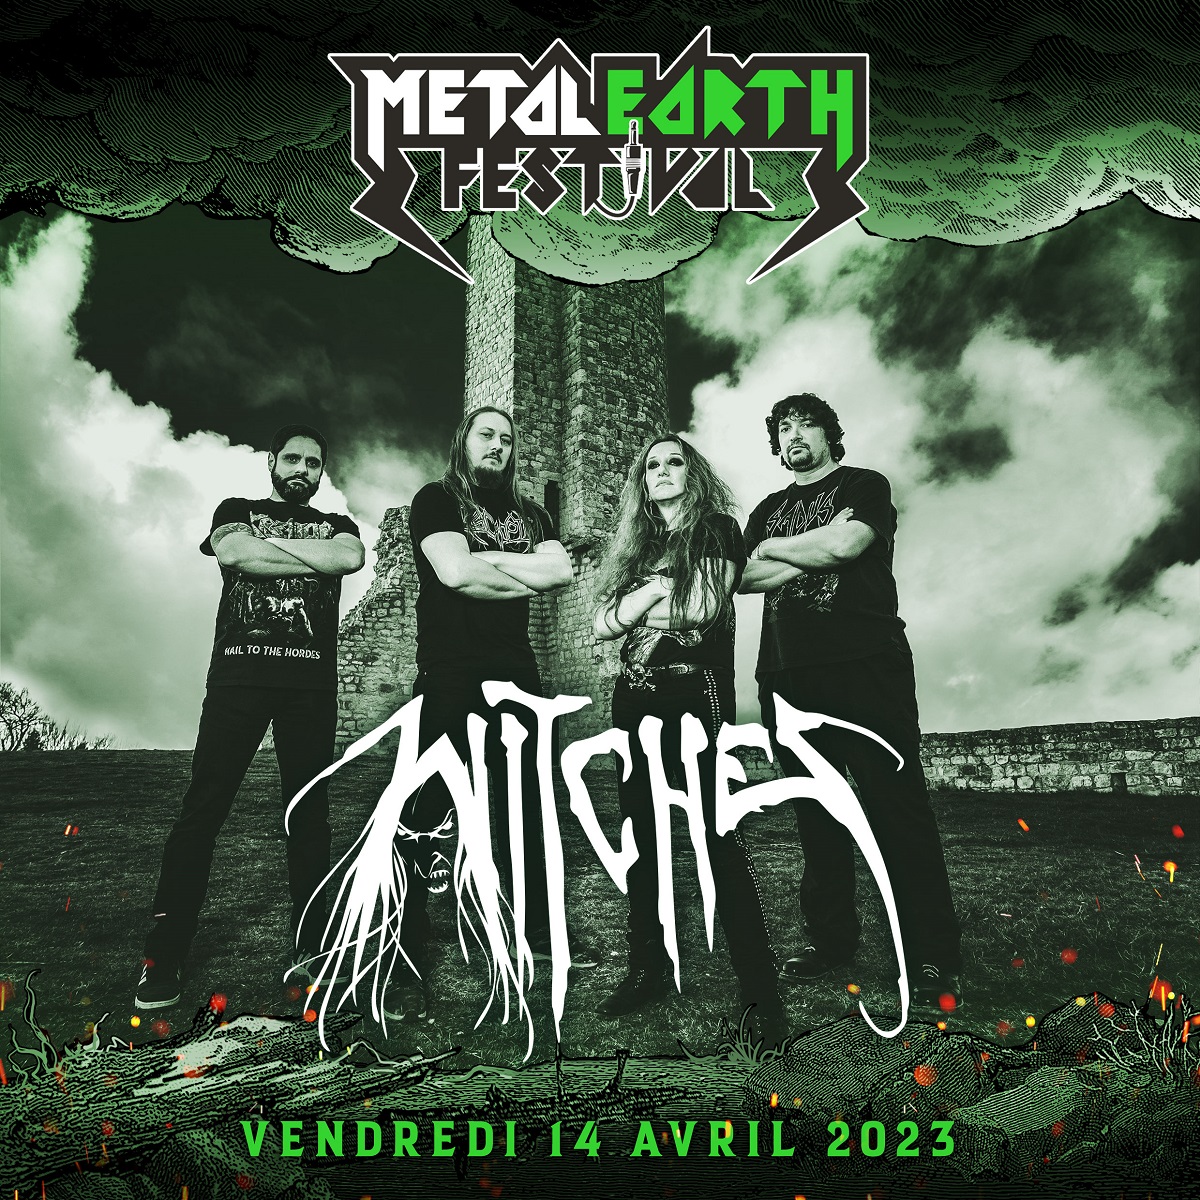 Witches flyer Witches + Despressive Witches + FT-17 @ Metalearth Festival #2 espace Léo Ferré Brest (29-France)